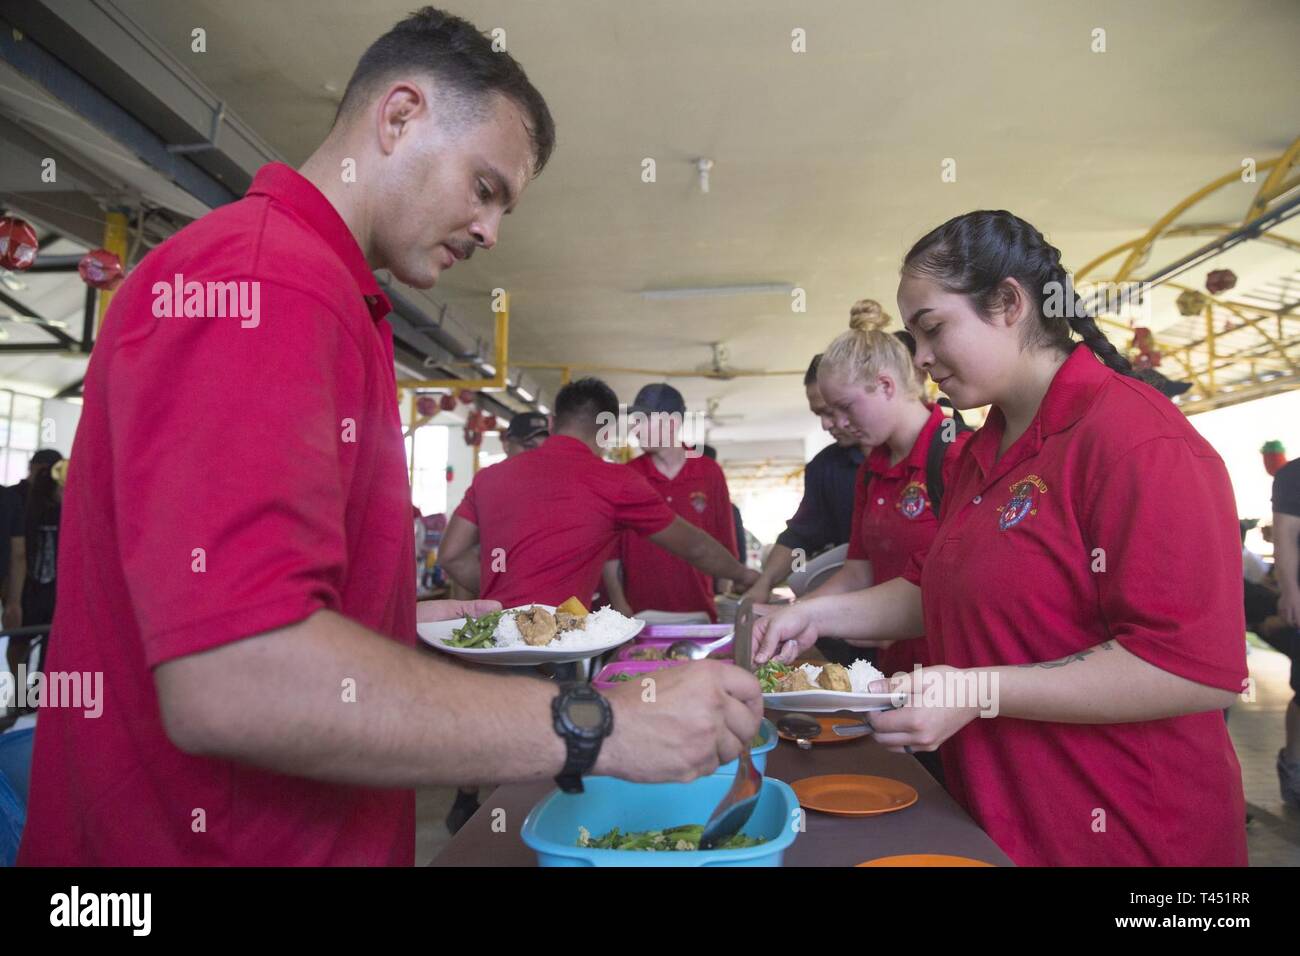 Cpl. John Robinson, a radio operator with Alpha Company, Battalion Landing Team, 1st Battalion, 4th Marines, the “China Marines,” grabs a bite to eat during a community relations event at Sabah Cheshire Home and Services in Sabah, Malaysia, Feb. 26, 2019. During the visit, the Marines and Sailors helped clean and renovate the facility by painting, clearing overgrown vegetation, and organizing storage space. Robinson, a native of Lafayette, Louisiana, graduated from Comeaux High School in May 2013 before enlisting in August 2016. Alpha Company Marines are the small boat raid specialists for BLT Stock Photo